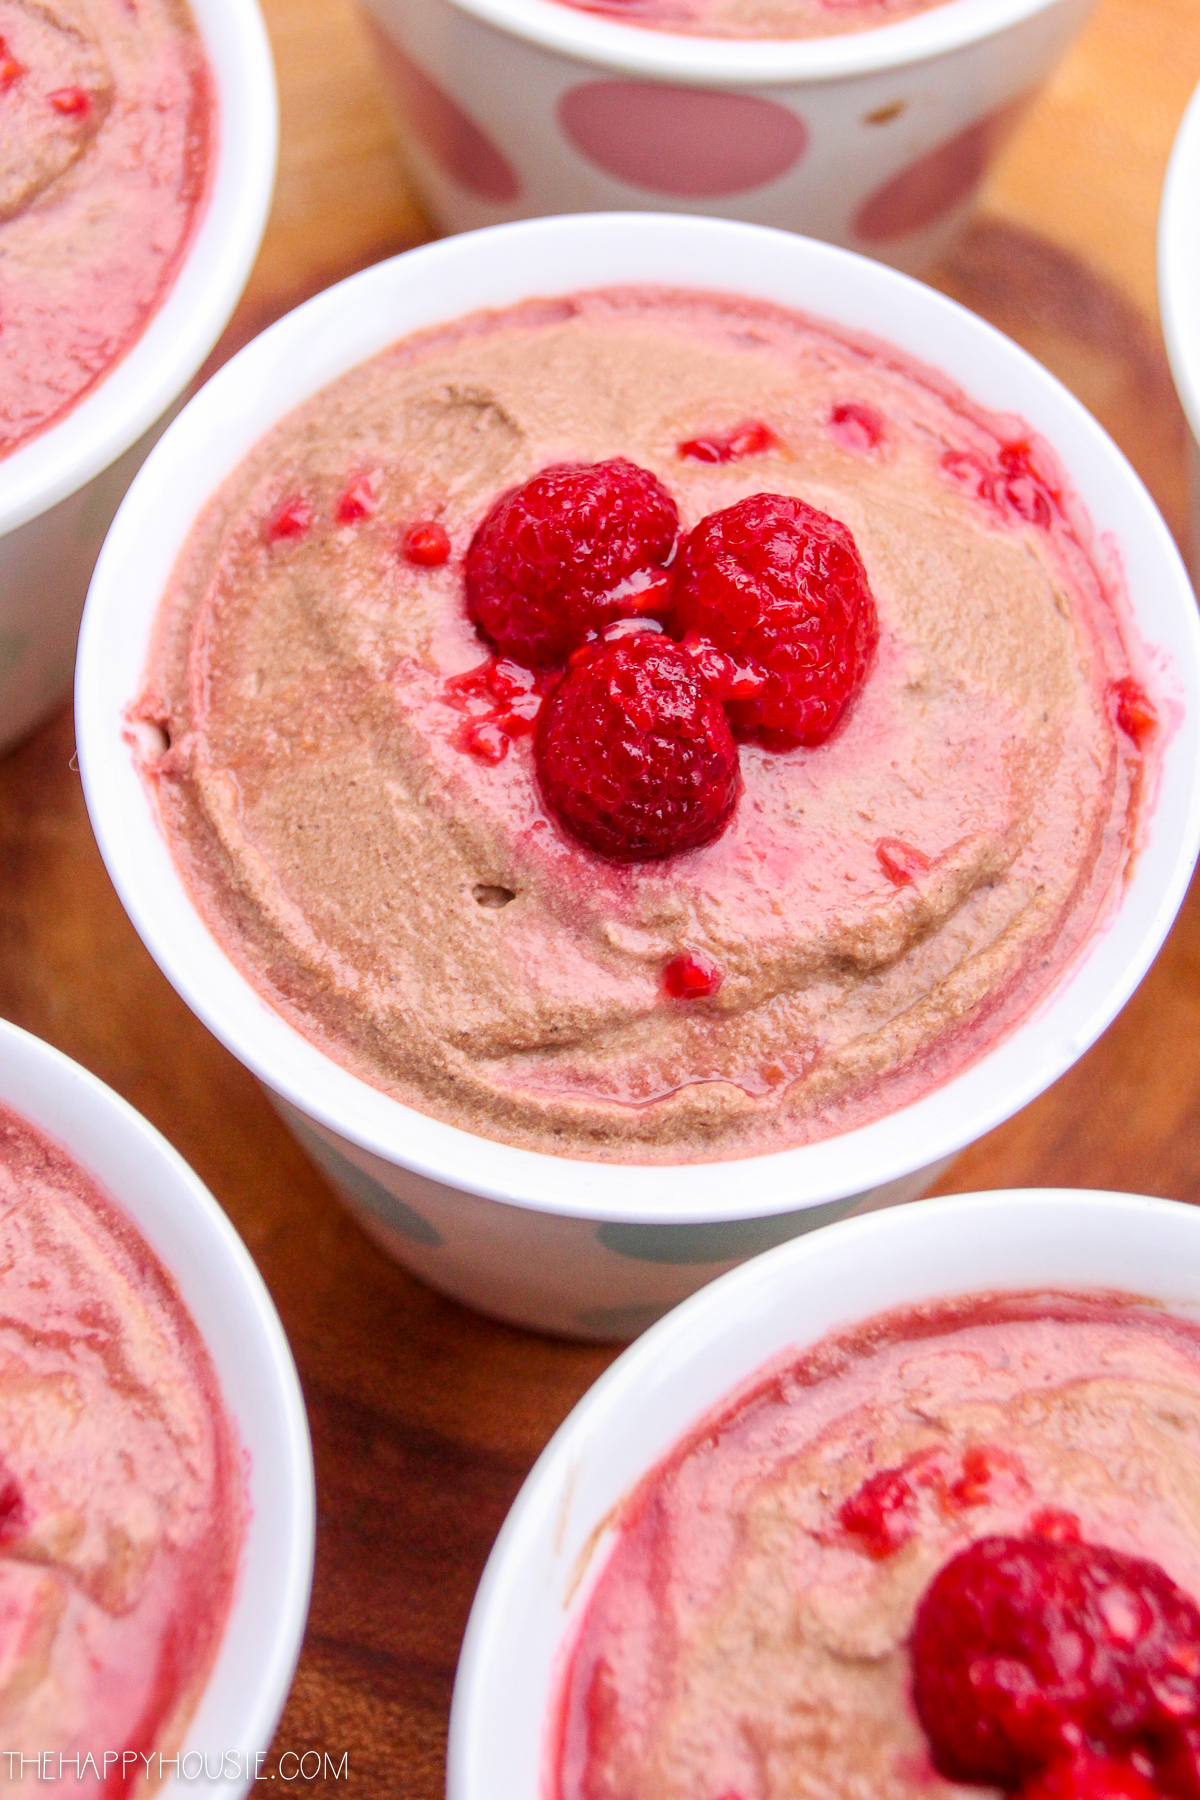 Up close picture of the raspberries top of the mousse.